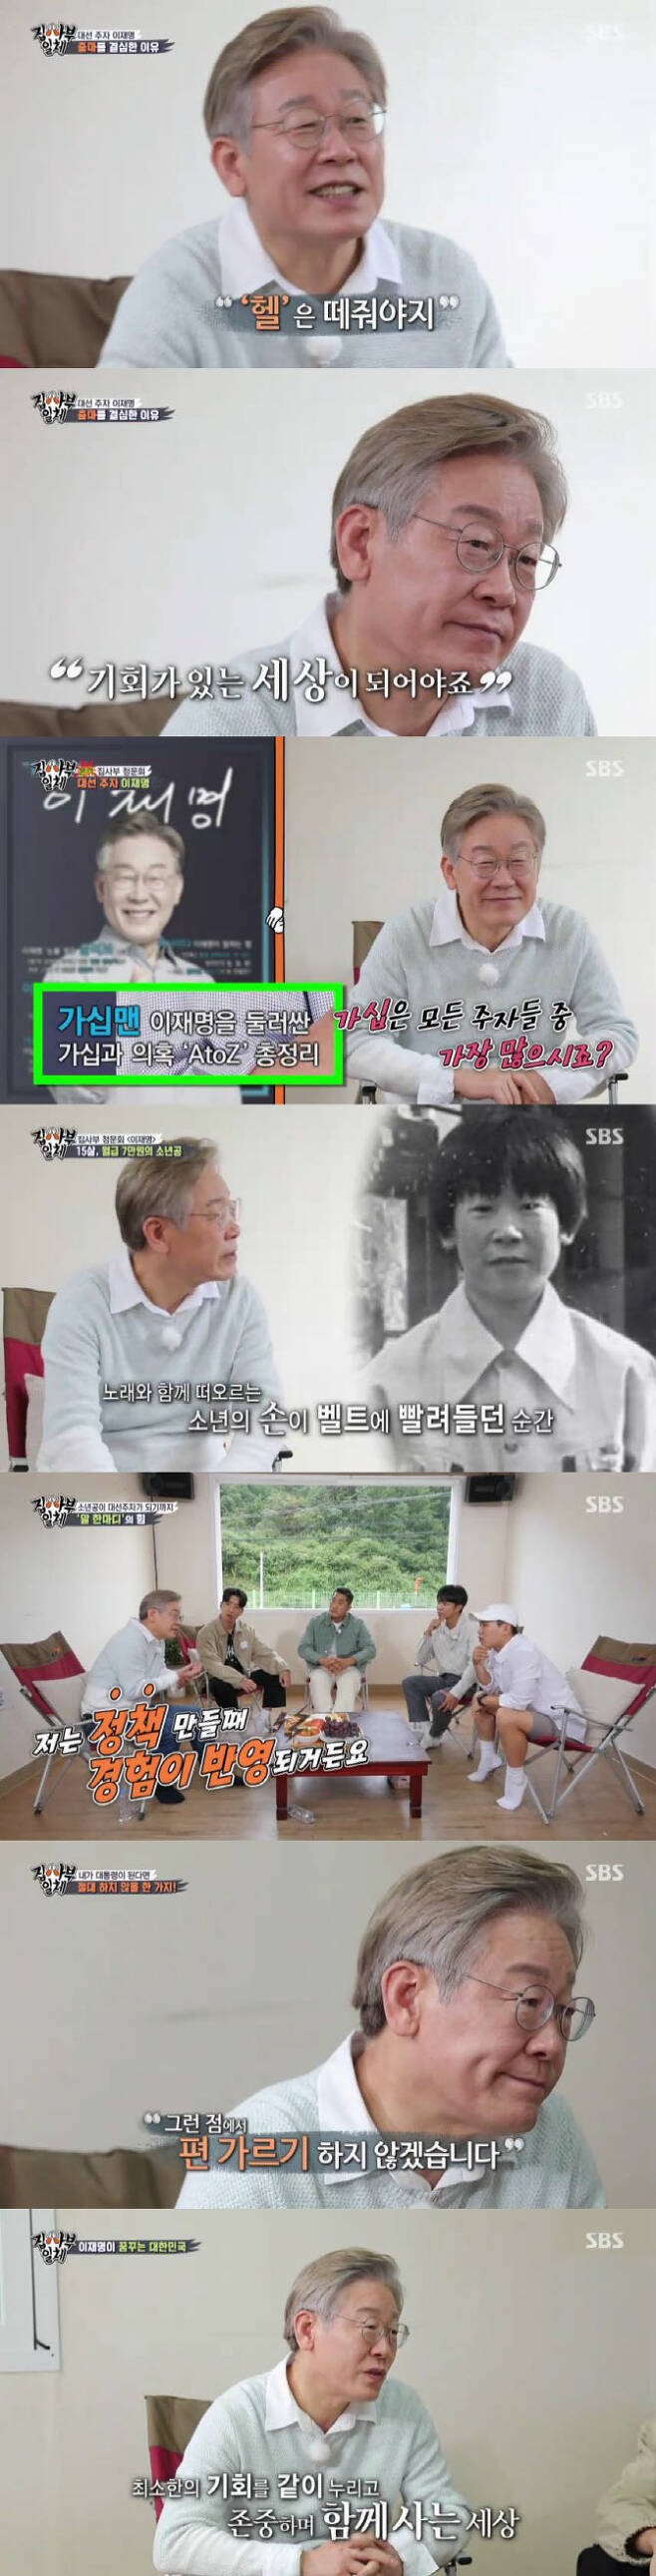 According to Nielsen Korea, a ratings agency, SBS All The Butlers, which was broadcast on the 26th, recorded 10.1% of households in the Seoul metropolitan area and 9.0% of All states.The target audience rating of 2049, which is a topical and competitive indicator, was 4.1%, the overwhelming number one in the same time zone, and the highest audience rating per minute soared to 13.5%.The 187th episode, starring Yoon Seok-ryul, was 7.4% on All States basis, with Lee Jae-myungs appearances having a higher audience rating.Lee Jae-myung, the governor of Gyeonggi Province, appeared as master on the day of the special feature of For runner after last week.The place where the members met Lee Jae-myung was Andong Station.Lee Jae-myung, who spent his childhood at Andong Station, said, I wanted to show you what it is. It is not really rough, it is very timid and emotional.He knew me as a very rough person, and it was an opportunity to show that I was not such a person. He said honestly about various issues surrounding him through the All The Butlers hearing, as well as the story of his life in the difficult environment since he was a boy.Lee Jae-myung said that he was suffering from a disability while living in a factory as a child when he decided to run for For. I was used to it at the time, and I thought it was natural.I wanted to change the world, he said. There are young people who call this country we live in hell.If I believe I can make something by making reasonable efforts, I wont. Im not going to do it.Since then, the All The Butlers hearing has begun.Members asked about former prosecutor President Yoon Seok-ryul and former Democratic Party leader Lee Nak-yeon as a common question for For.Lee Jae-myung cited the economy as the strength he wanted to bring from Lee Nak-yeon, and the evaluation that it would be fair from Yoon Seok-ryul.He added, There is no reason to win because it is an internal competition with Lee Nak-yeon, he said, describing Yoon Seok-ryul as a competitor to win and Lee Nak-yeon as a competitor to win.Lee Jae-myung, who asked, If you become a president, you will never do it. I will not side with you, he said. When you compete, you represent the Democratic Party but you represent everyone when you become president.I will not take sides in that regard, he said.Finally, Lee Jae-myung asked the question of Korea I dream of, A common sense world where you do not lose the rule if you break the rules.Everyone is in harmony, enjoying the least opportunity, respecting and living together. Meanwhile, the special feature of All The Butlers For will be featured by former Democratic Party leader Lee Nak-yeon on October 3, following former prosecution President Yoon Seok-ryul and Gyeonggi Province Governor Lee Jae-myung.